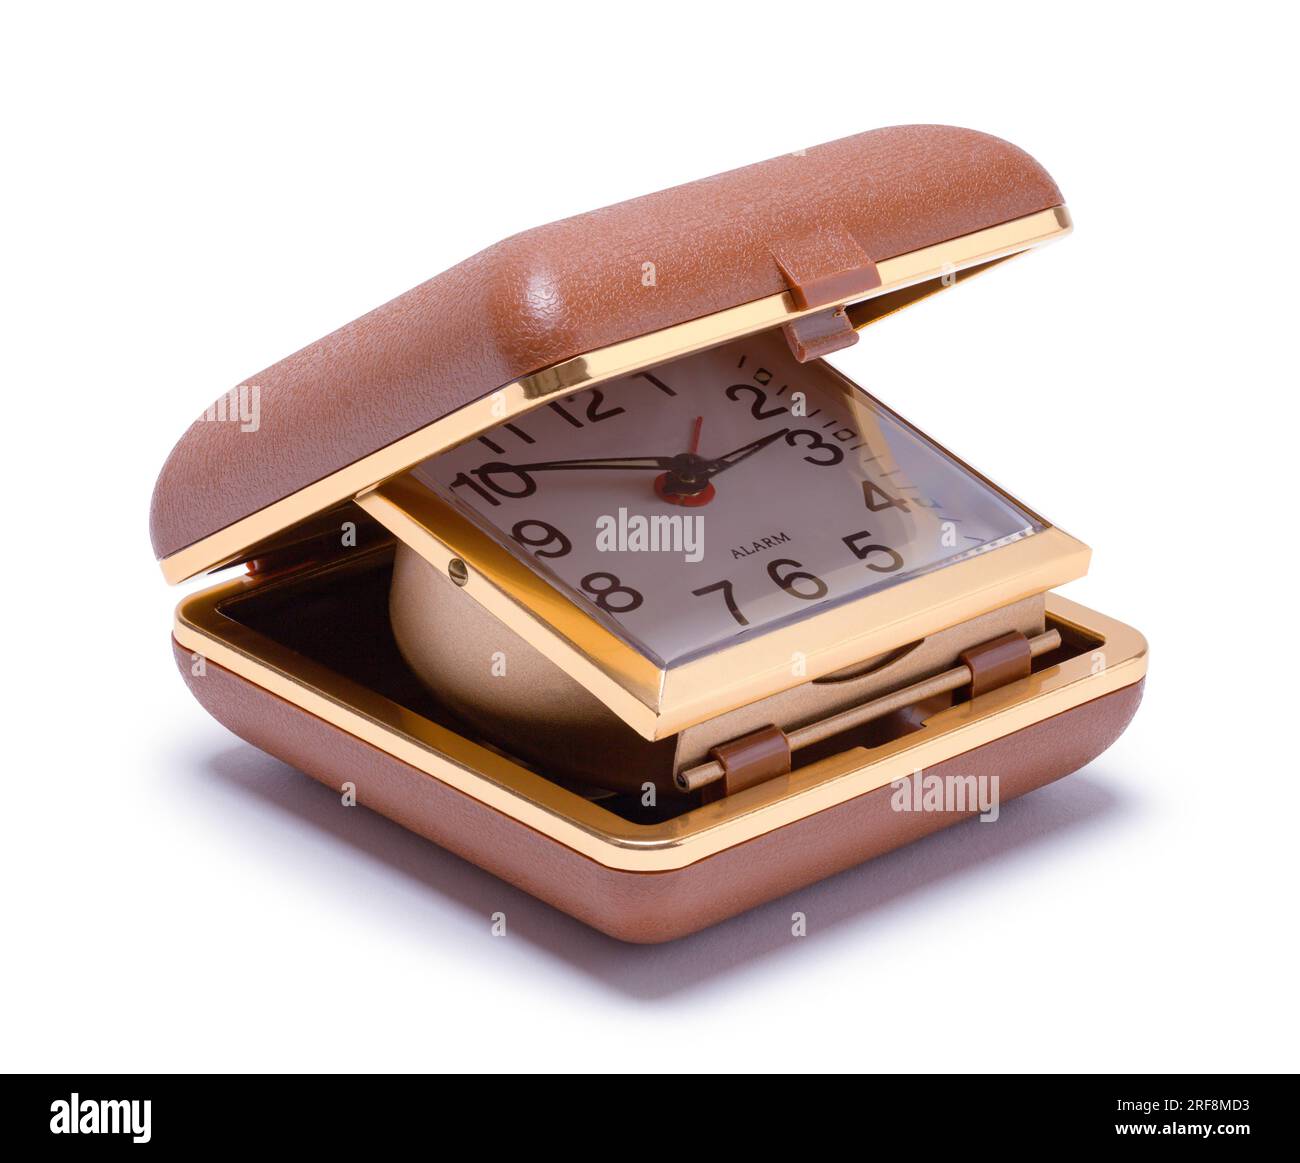 Closed Travel Alarm Clock Cut Out on White. Stock Photo